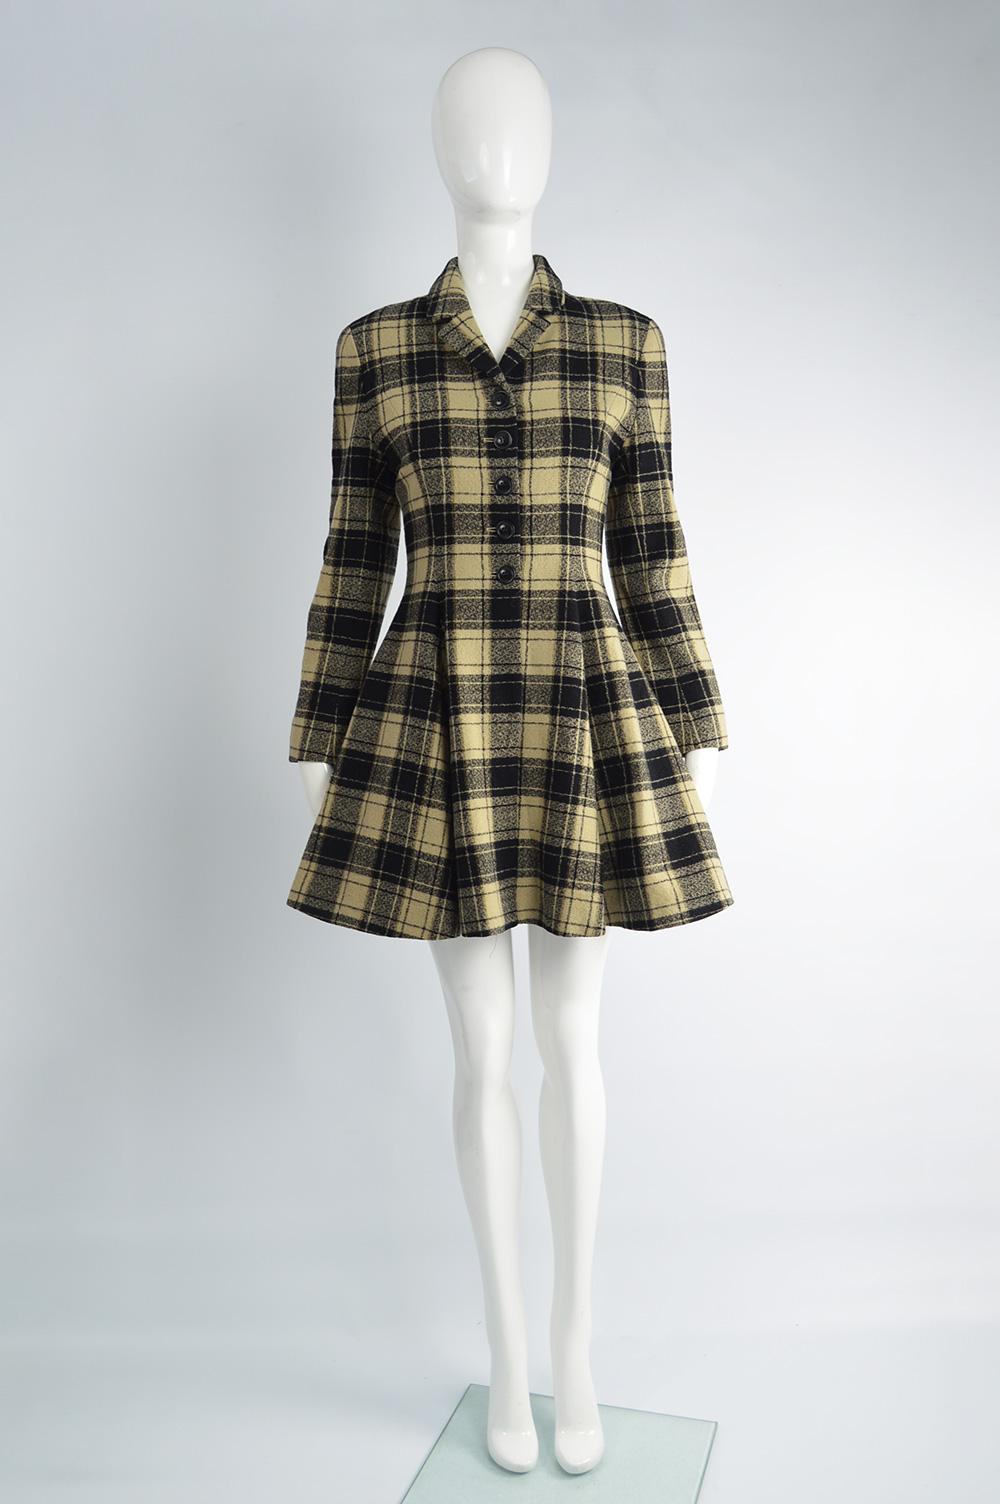 A fabulous vintage women's Kenzo coat from the 80s in a plaid checked lambs wool tweed with an amazing silhouette that has ever so slightly padded shoulders just to contrast with the fitted waist which then flares out into a fabulous skirt.

Size: